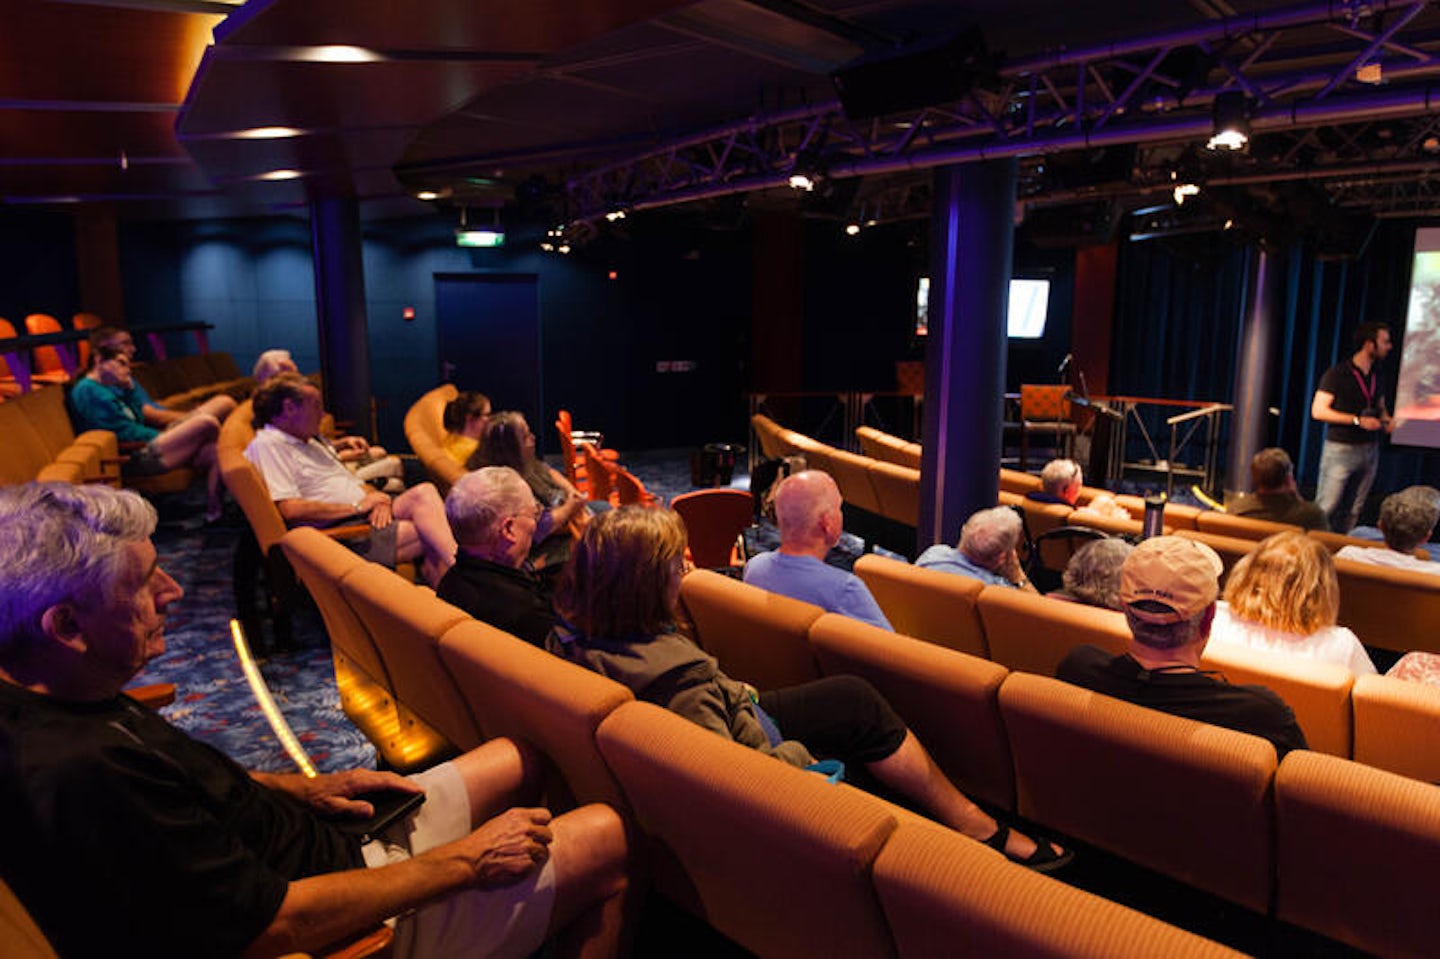 Celebrity Central on Celebrity Silhouette